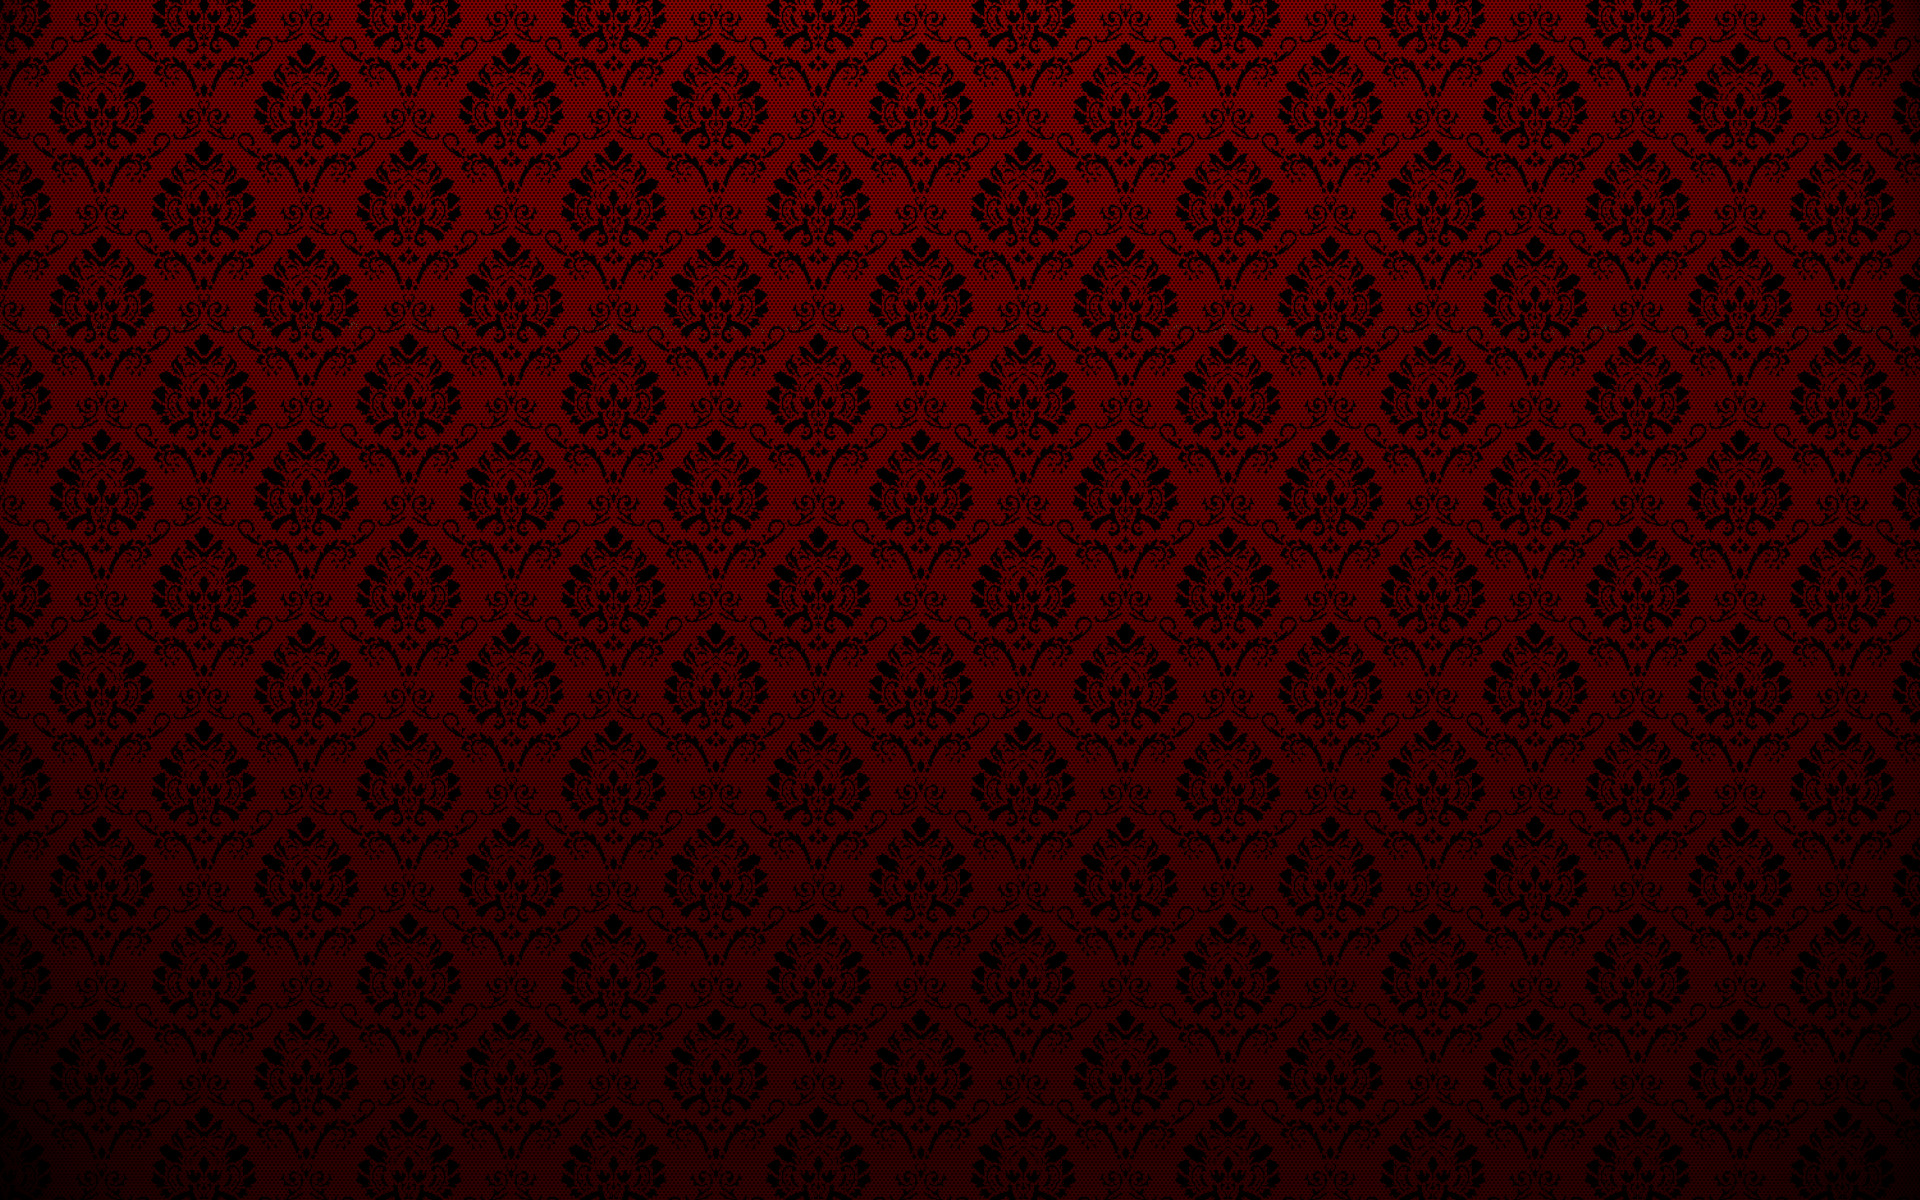 1920x1200 ... Photo Of Deep Red Background Wallpaper Texture Or Surface Stock .